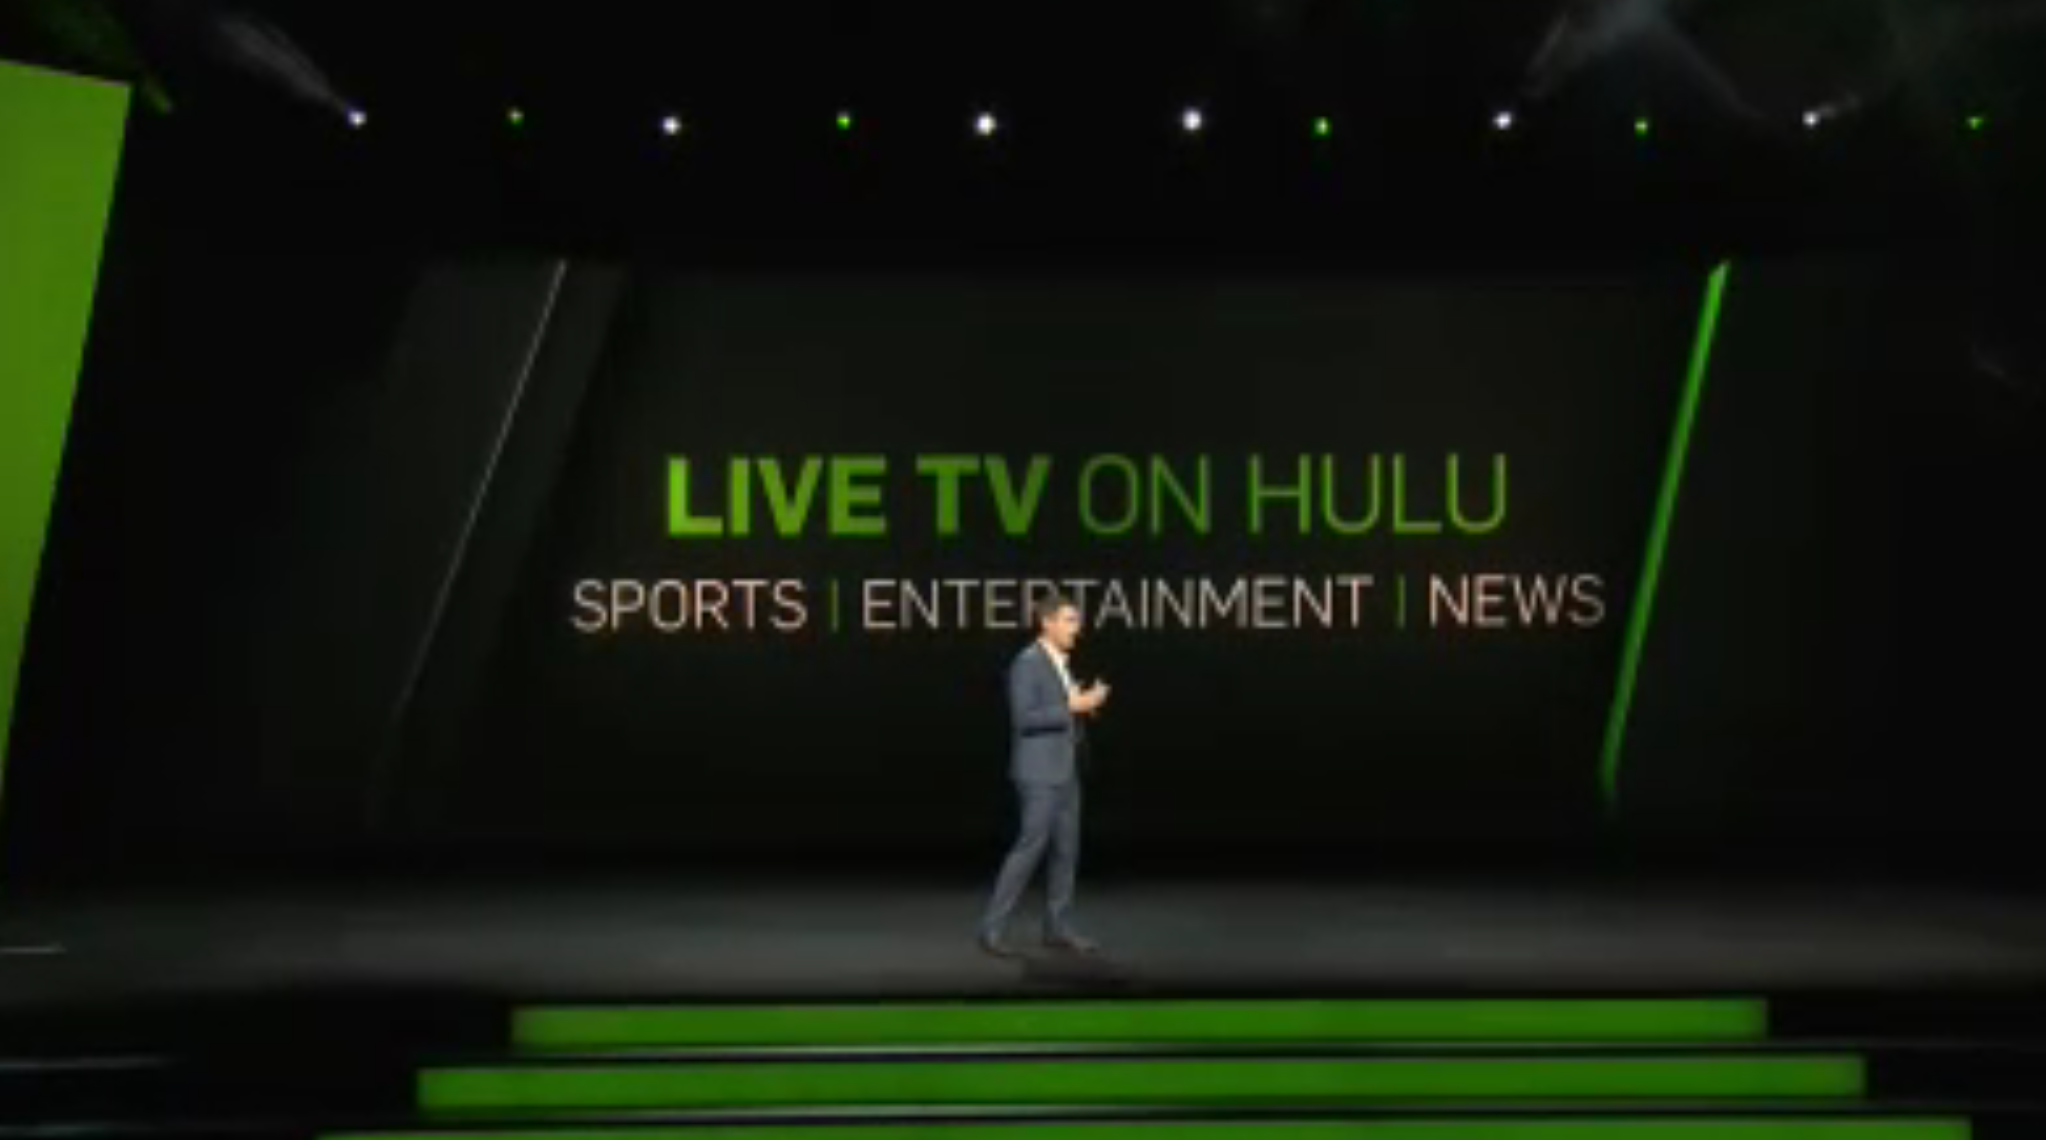 Hulu CEO confirms plans for a live TV streaming service in 2017 TechCrunch